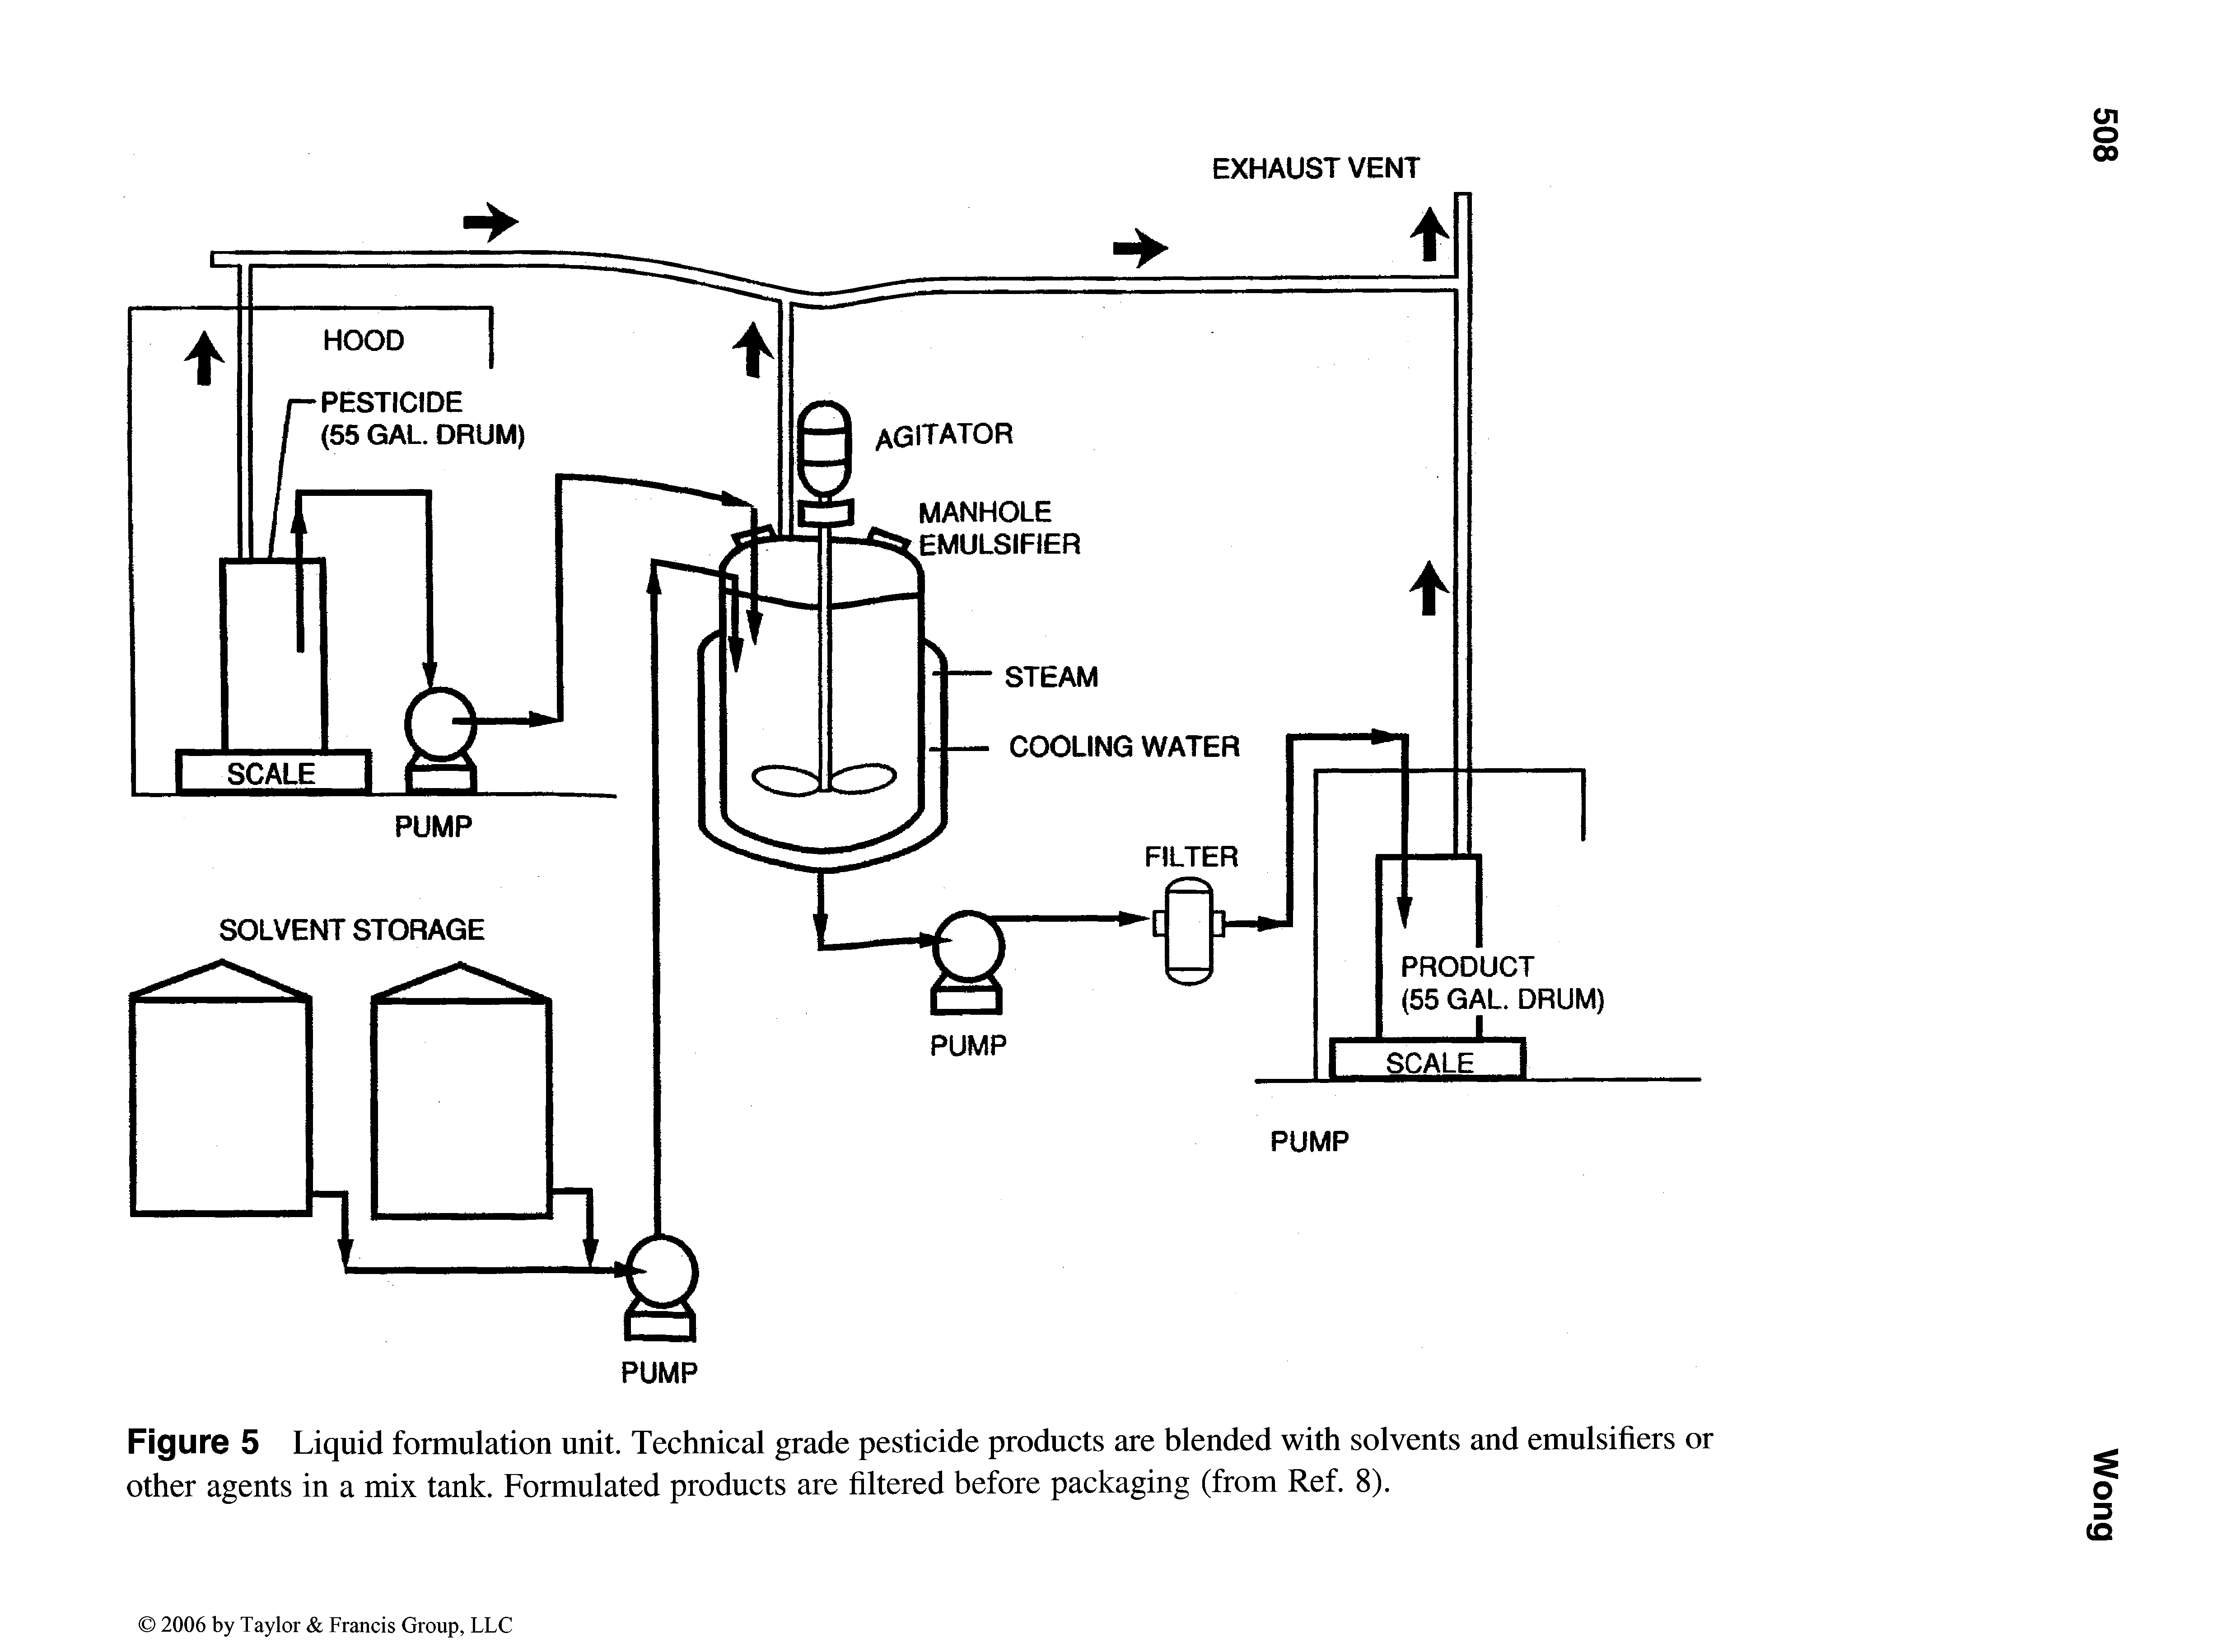 Figure 5 Liquid formulation unit. Technical grade pesticide products are blended with solvents and emulsifiers or other agents in a mix tank. Formulated products are filtered before packaging (from Ref. 8).